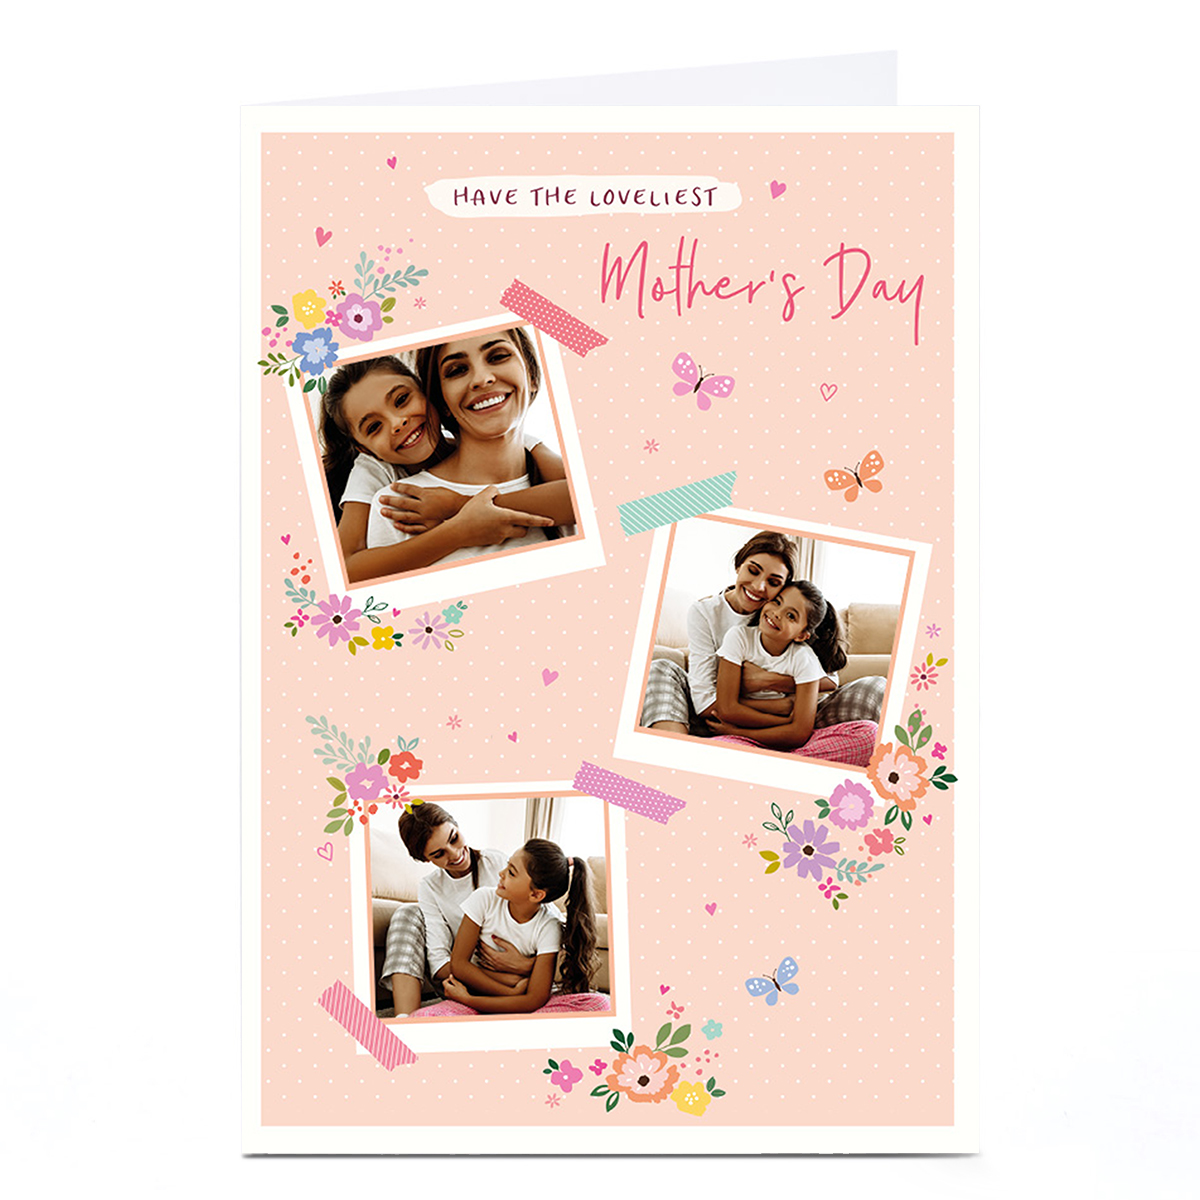 Photo Nikki Upsher Mother's Day Card - Have the Loveliest Day